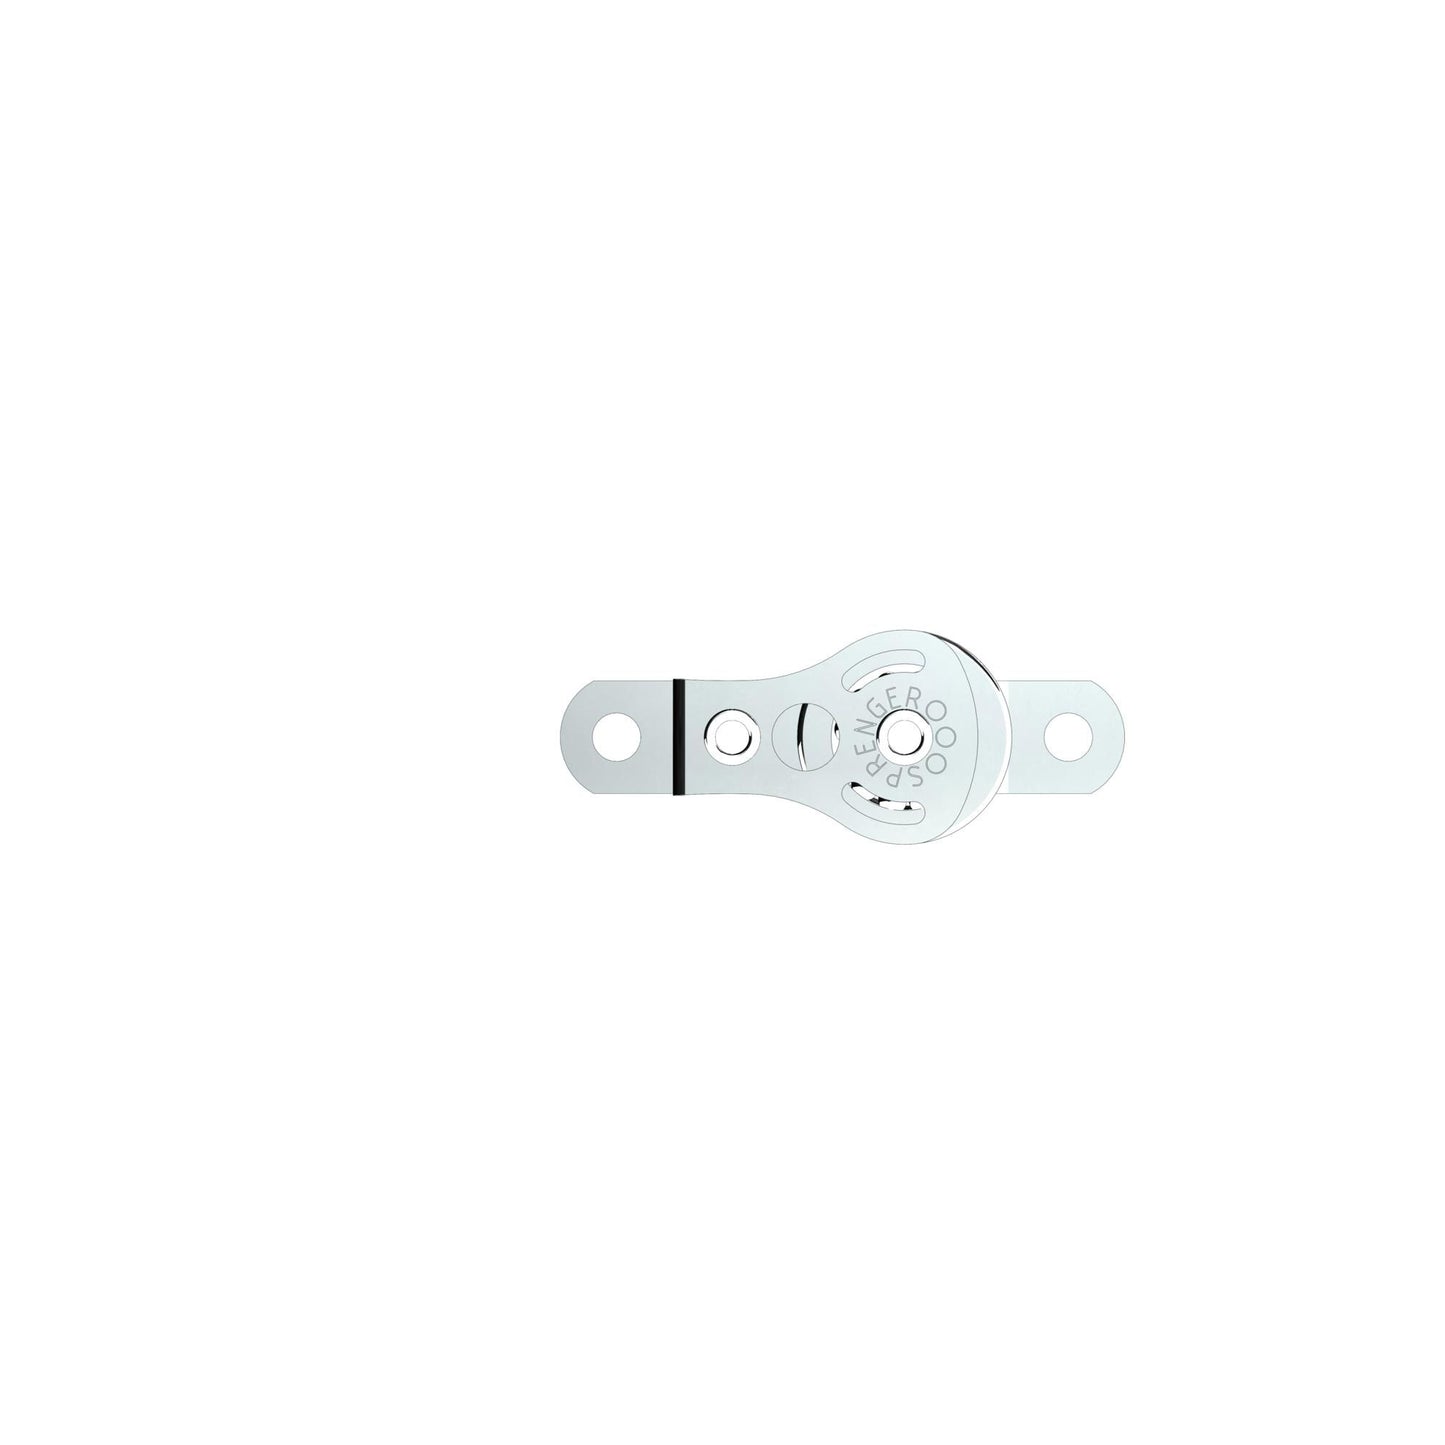 Fixed flat stainless steel pulley Micro 19mm